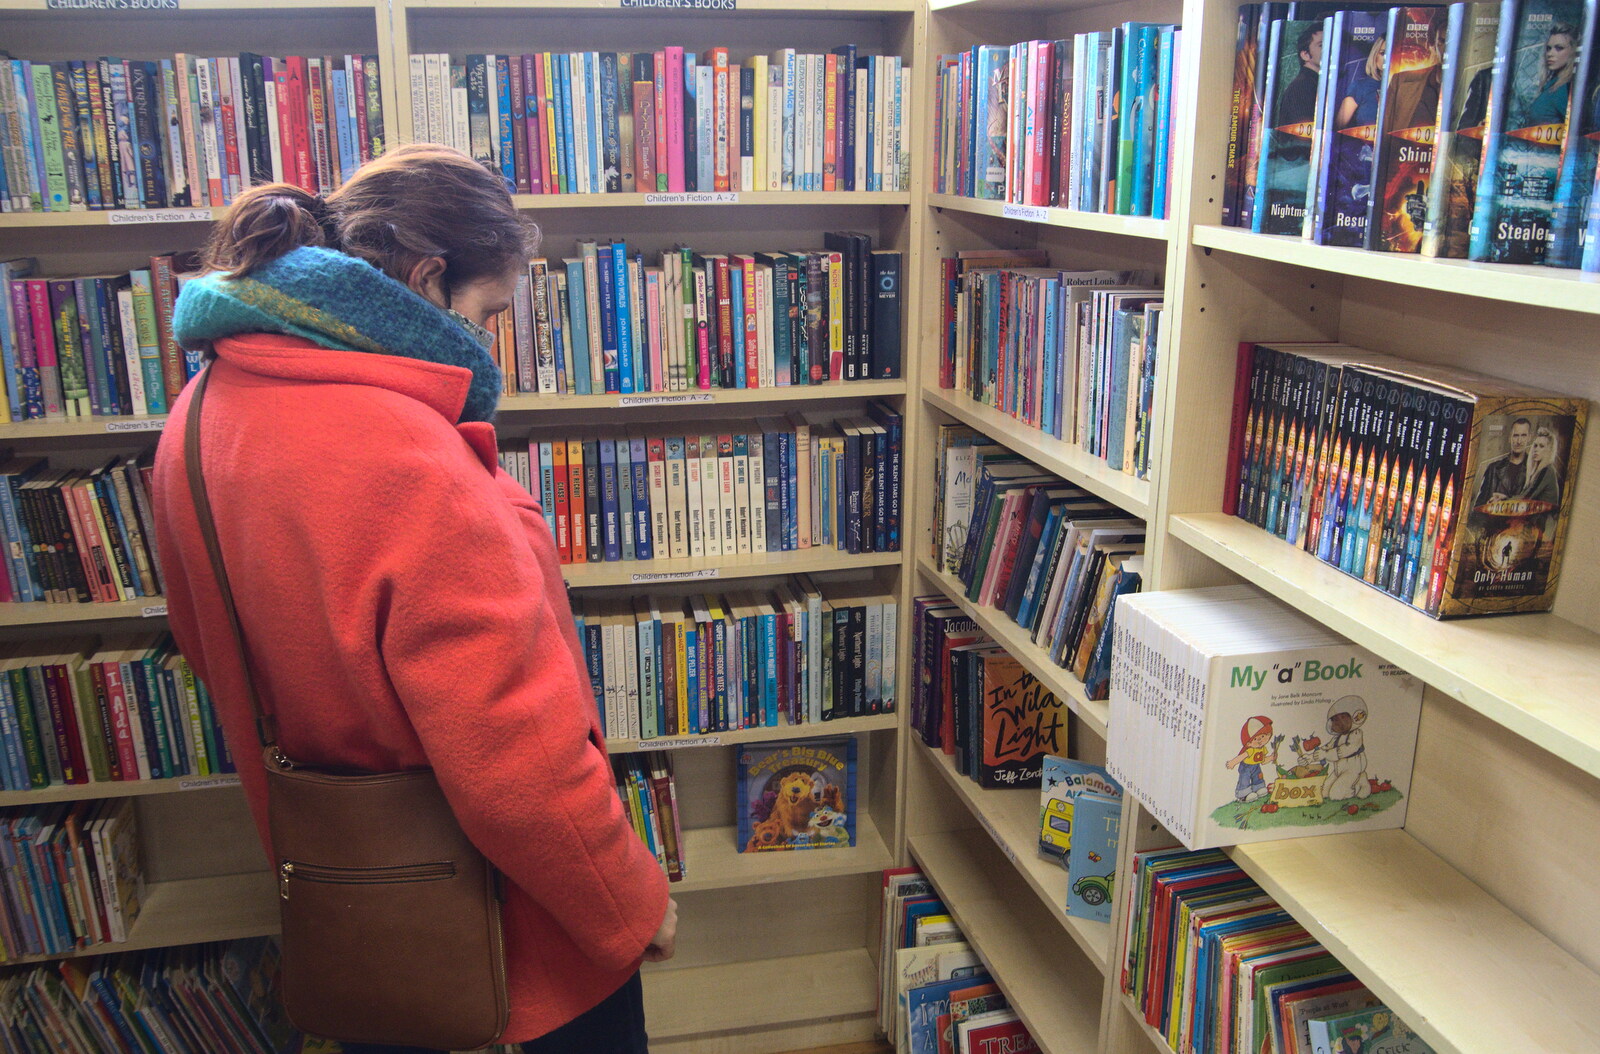 Isobel browses in the children's section from A Visit to Blickling Hall, Aylsham, Norfolk - 9th January 2022